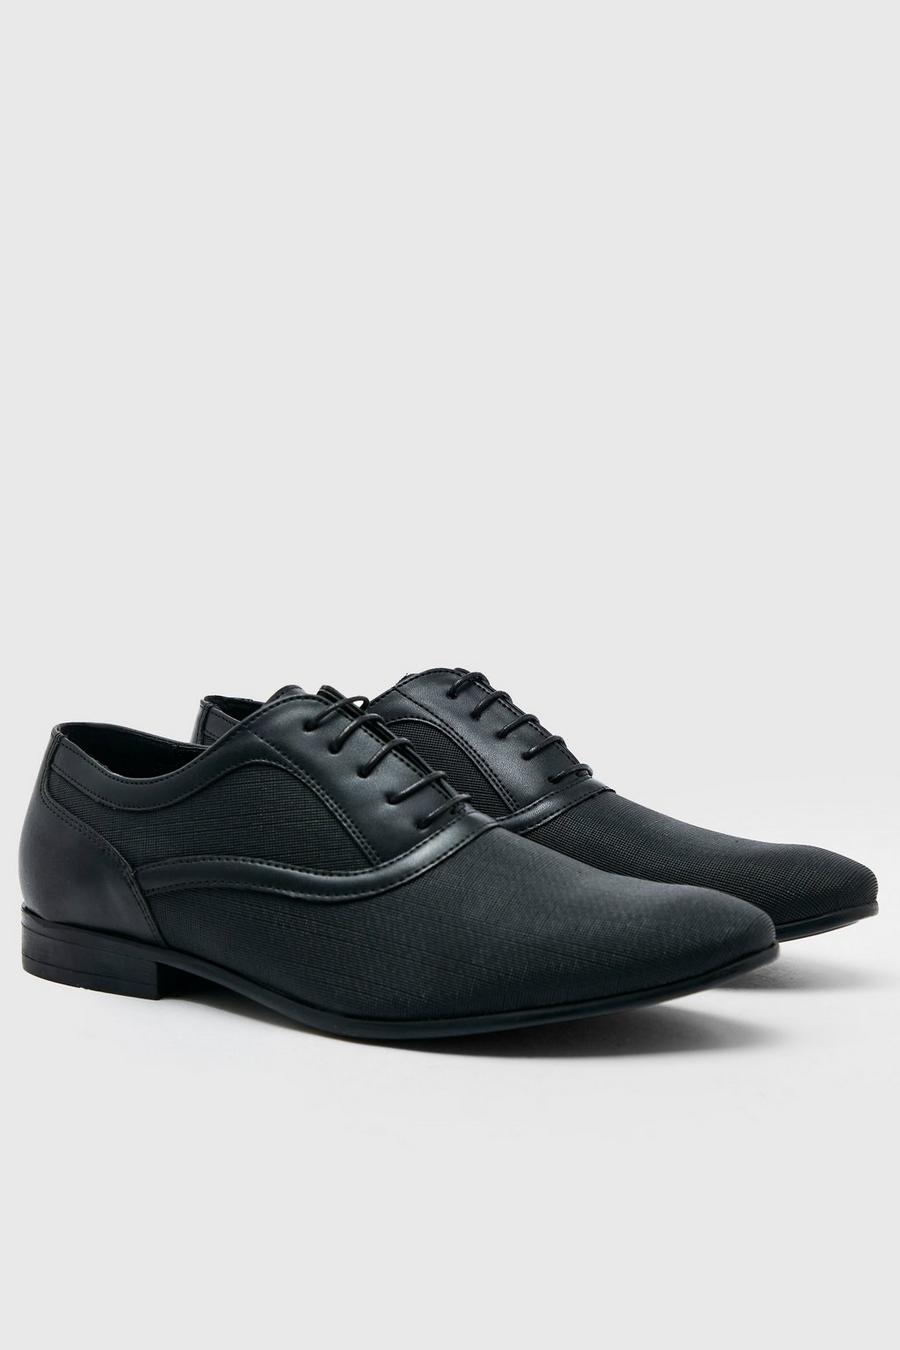 Black schwarz Embossed Faux Leather Oxford